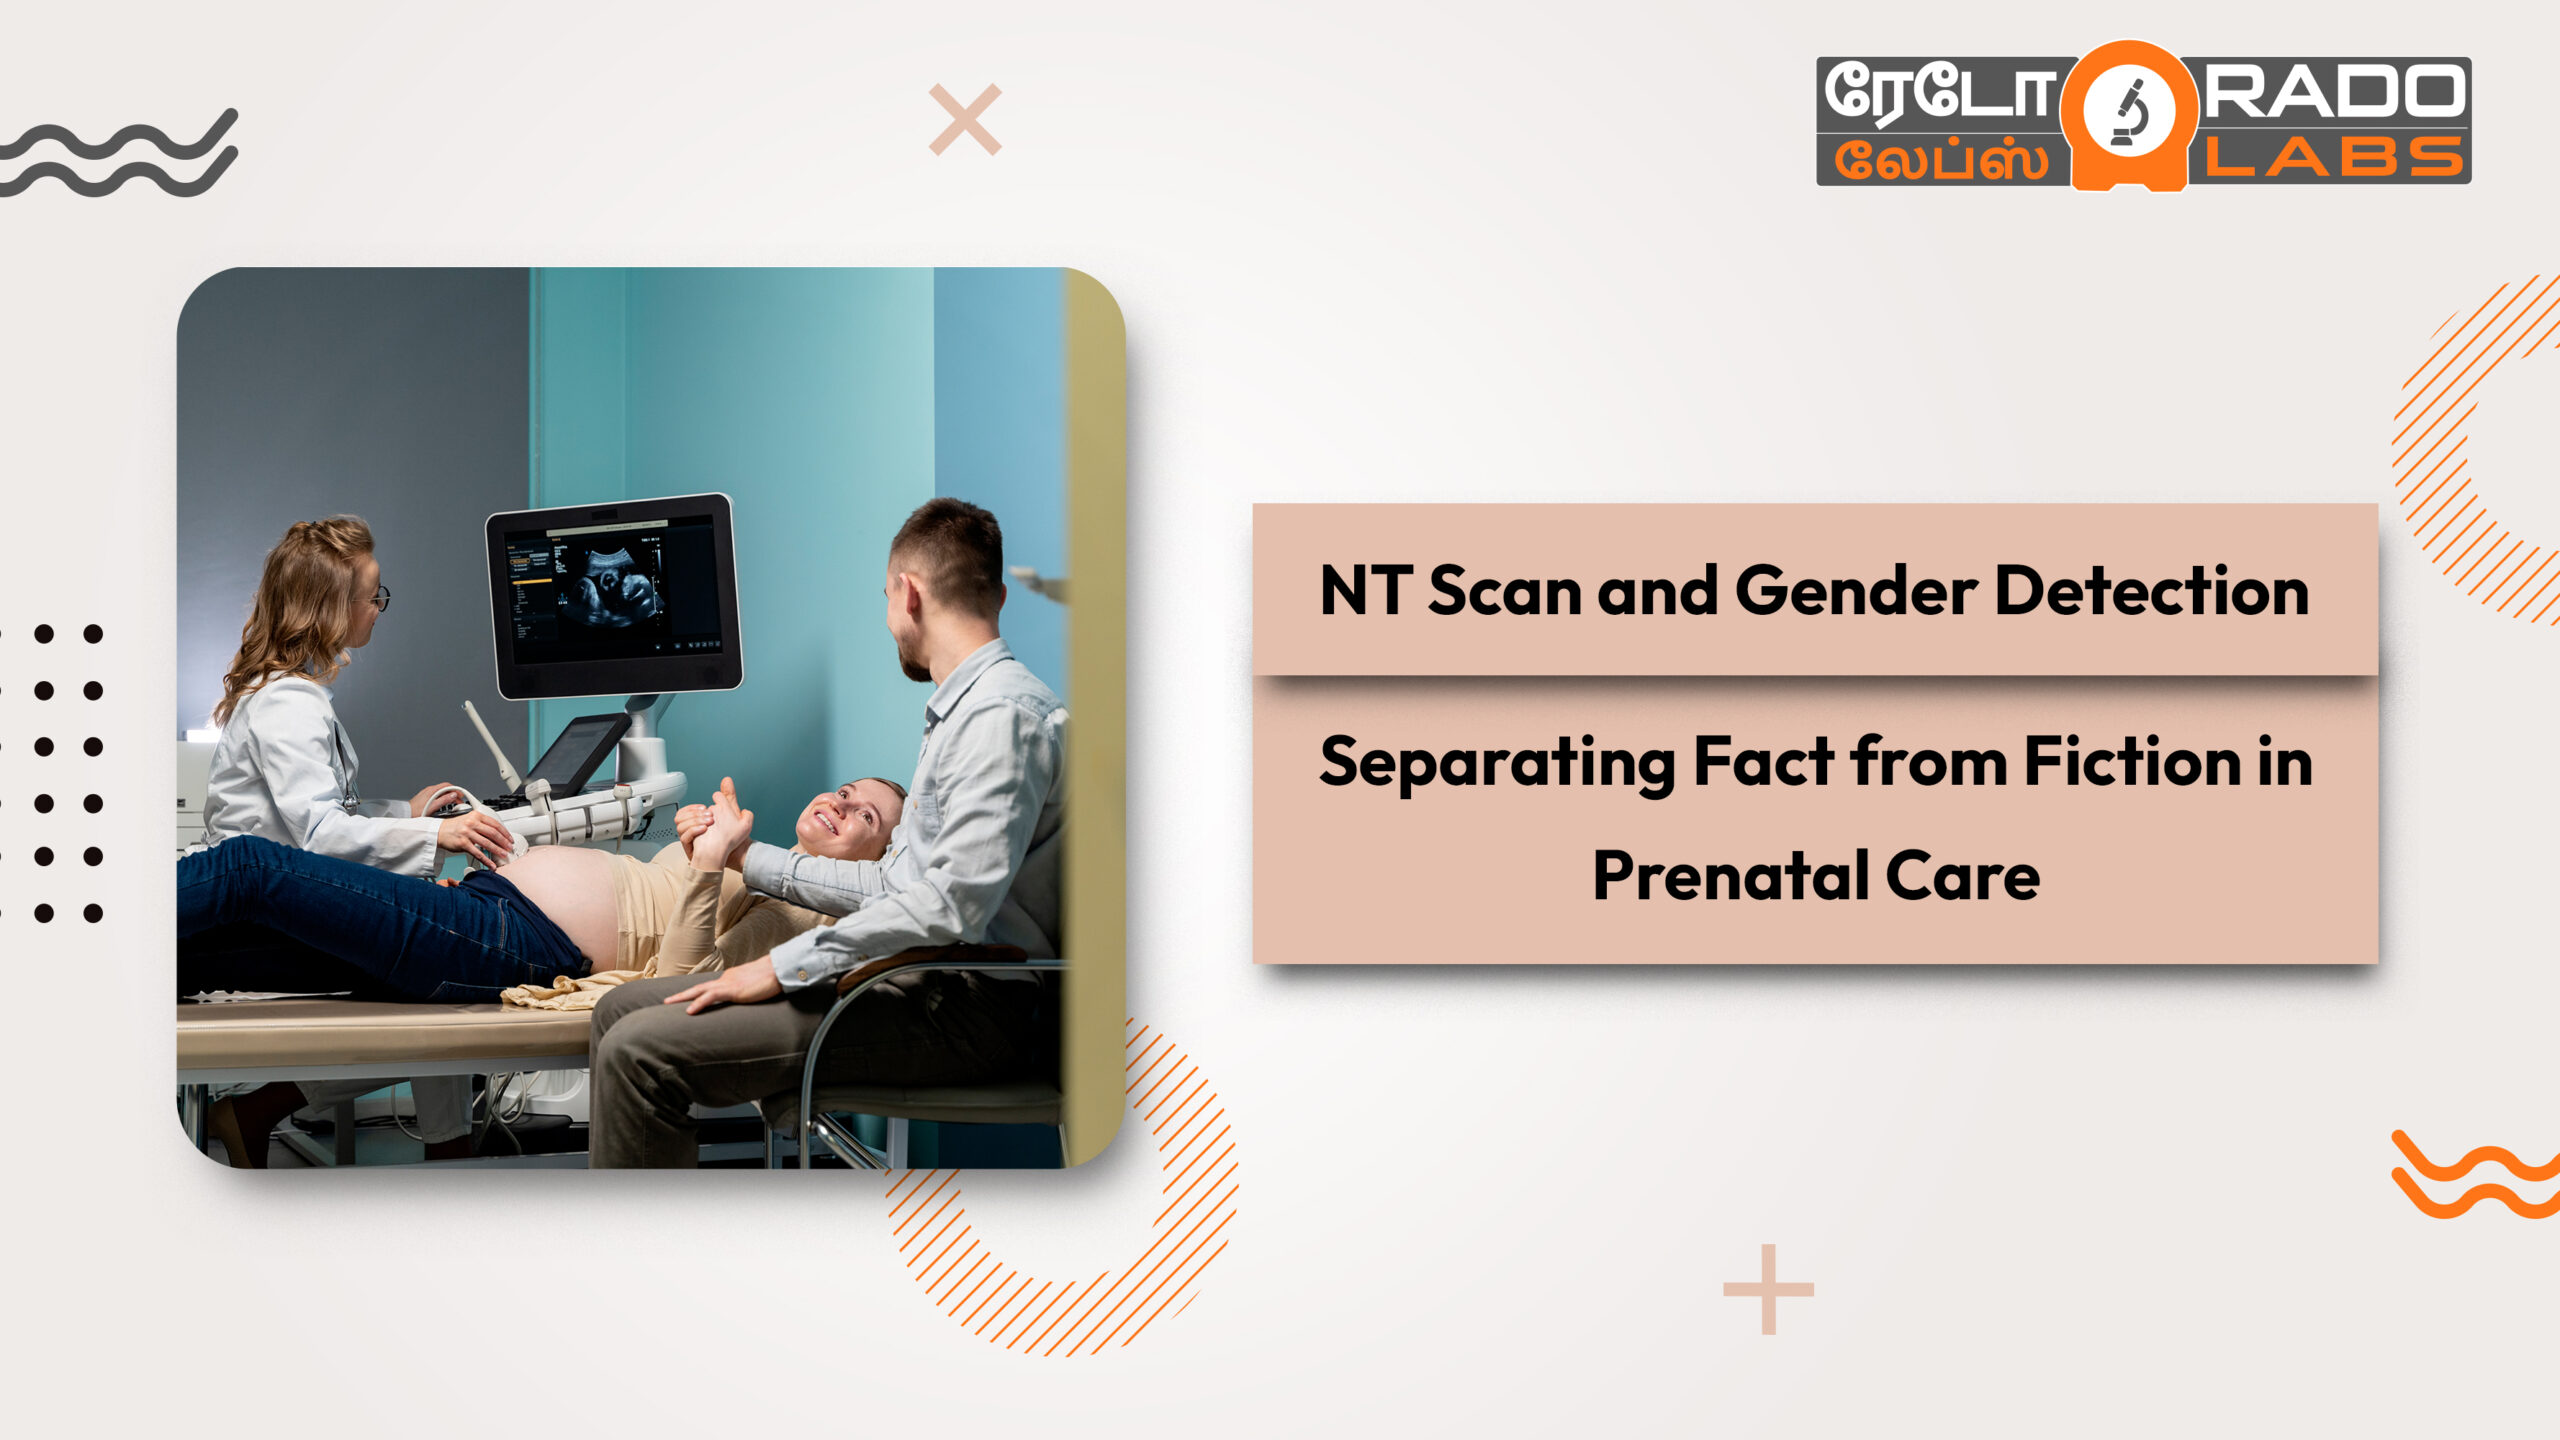 Can NT Scan detect gender?